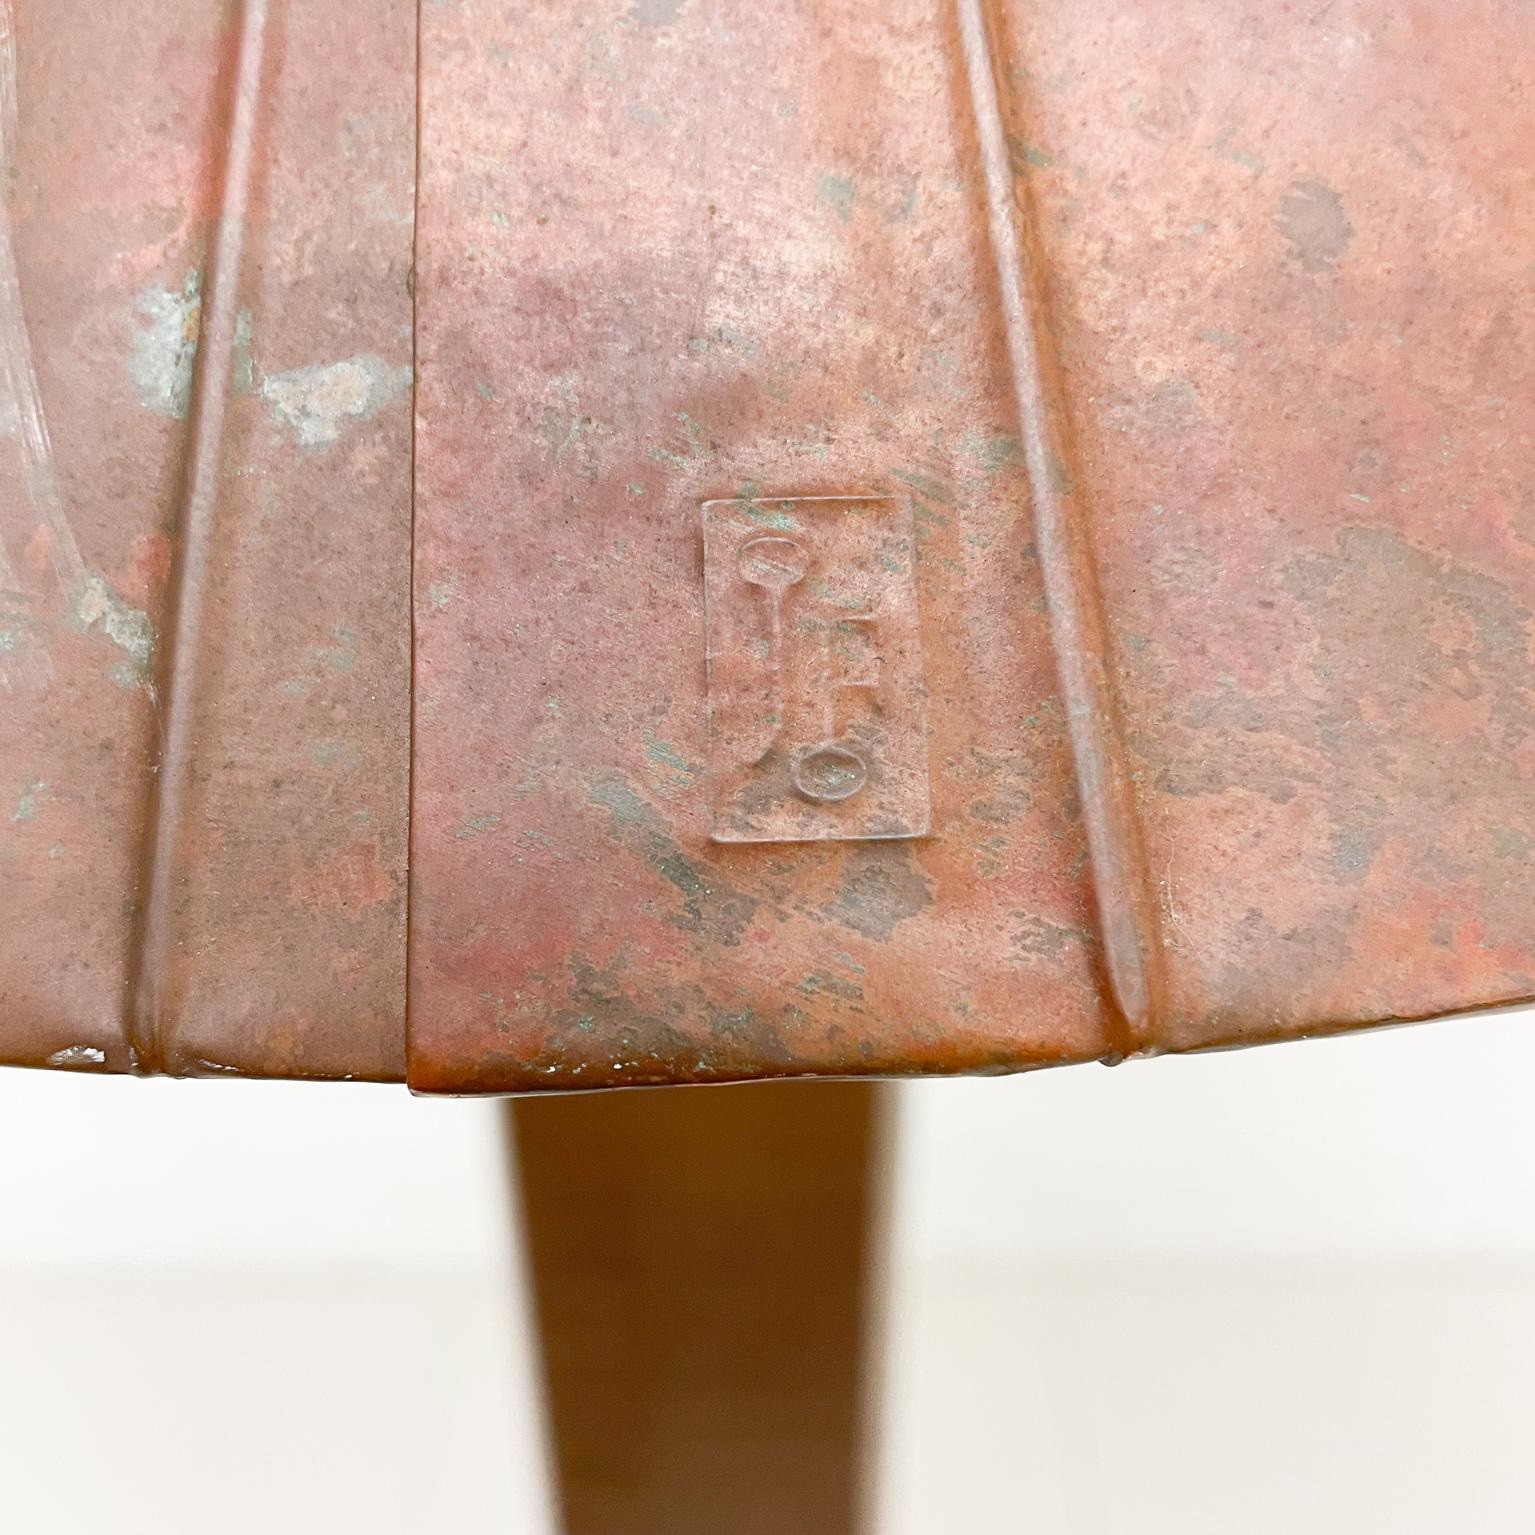 1980s Elegant Tall Column Floor Lamp design of Egyptian pyramid.
Plaster and ribbed copper.
Maker stamp but difficult to read. 
66inches to finial, 57 H to socket, x 10.5 W (base) x 9 D
Shade 25.38 diameter at widest point
Preowned vintage